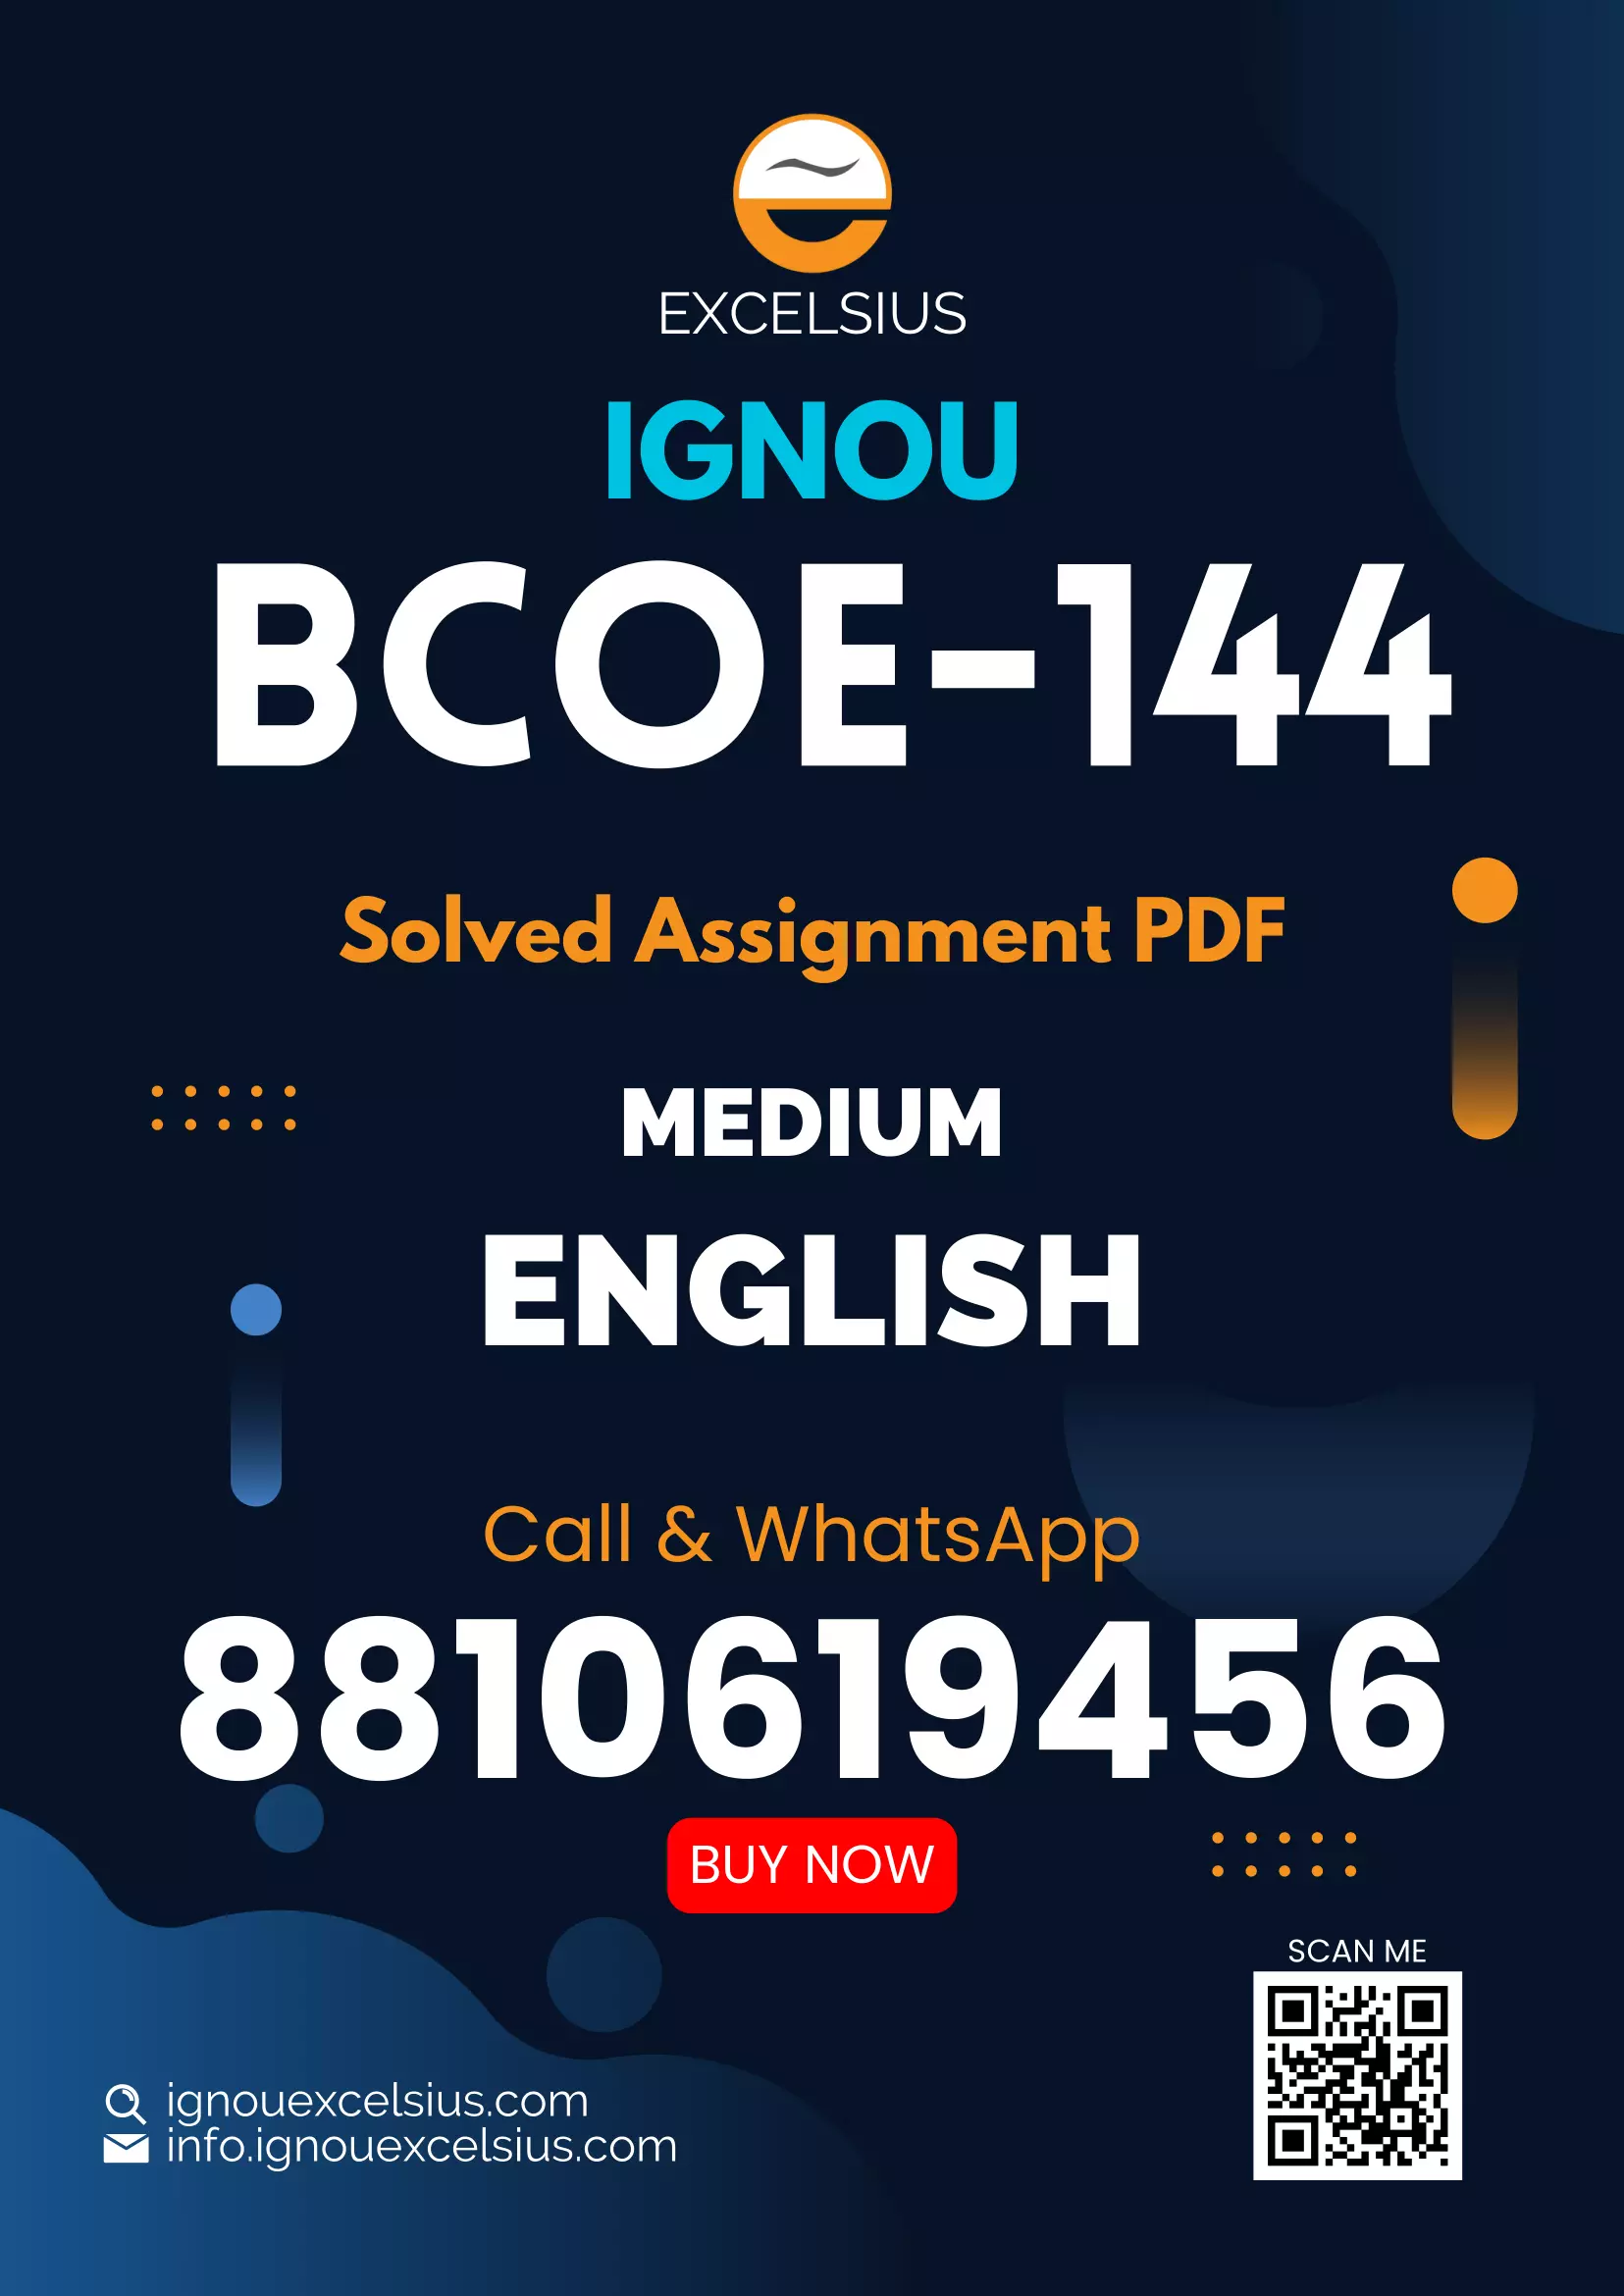 IGNOU BCOE-144 - Office Management and Secretarial Practice, Latest Solved Assignment-January 2023 - December 2023